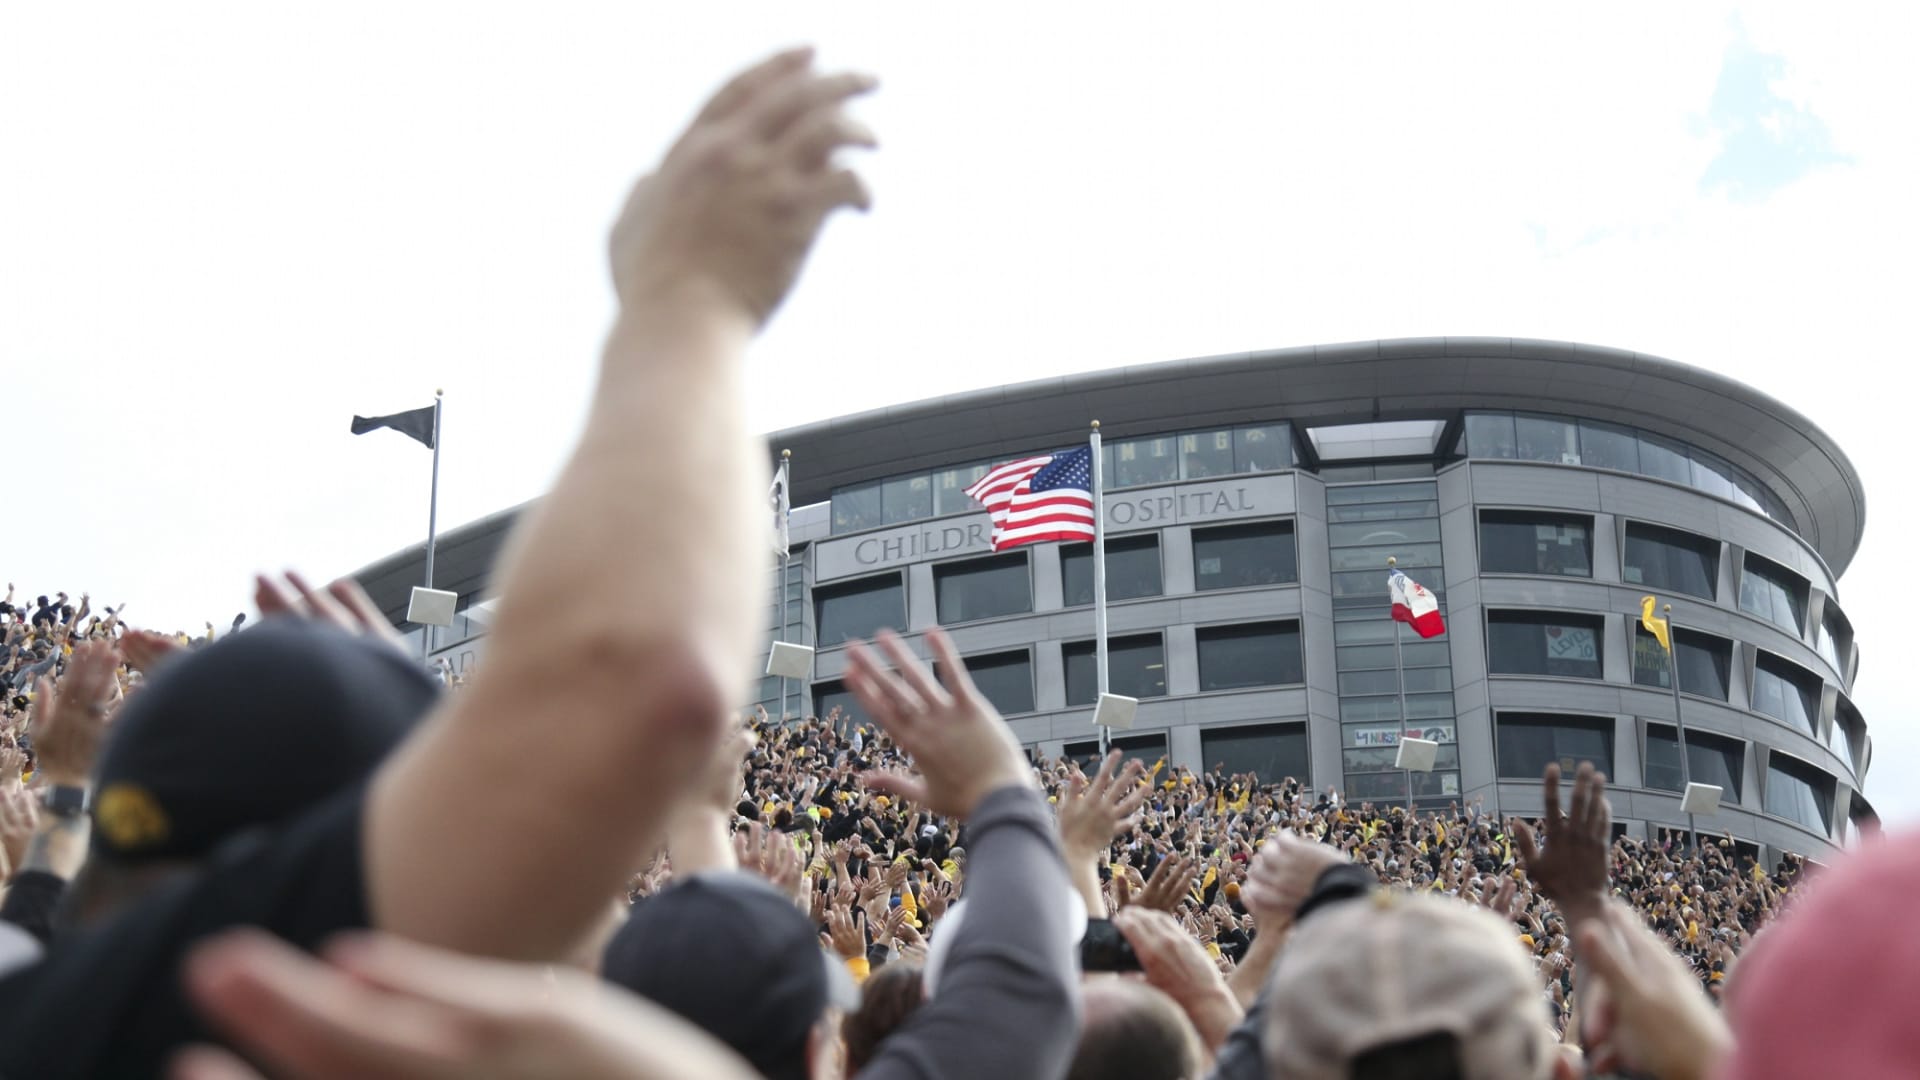 Fans wave to children at the University of Iowa Stead Family Children's Hospital during the Iowa football game at Kinnick Stadium in Iowa City, Iowa.